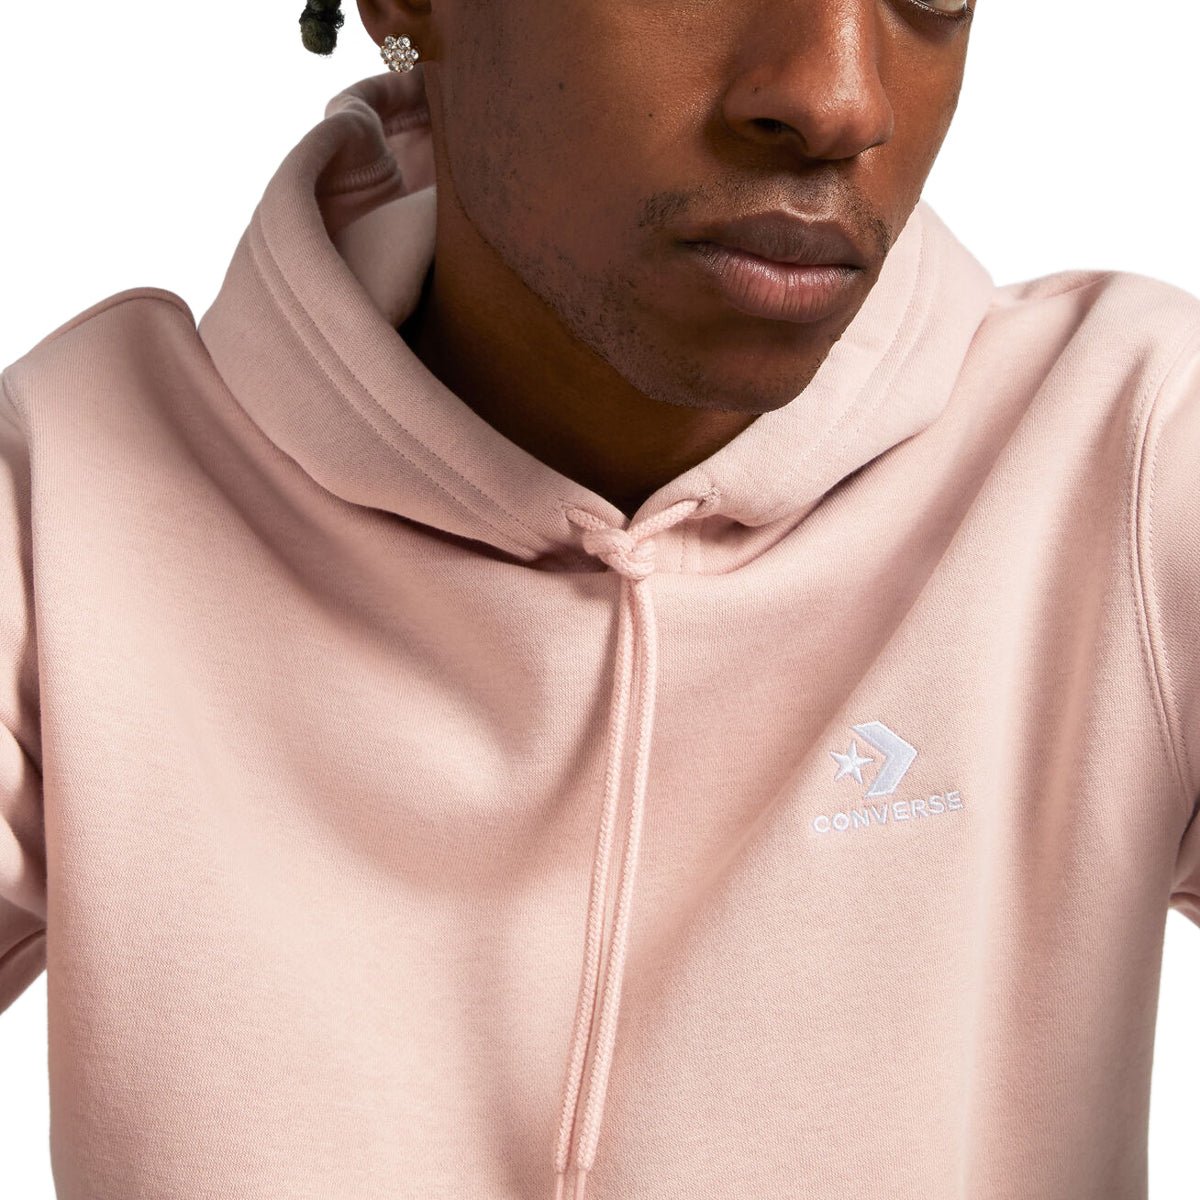 Converse Go-to Embroidered Star Chevron Hoodie - Pink Sage image 4